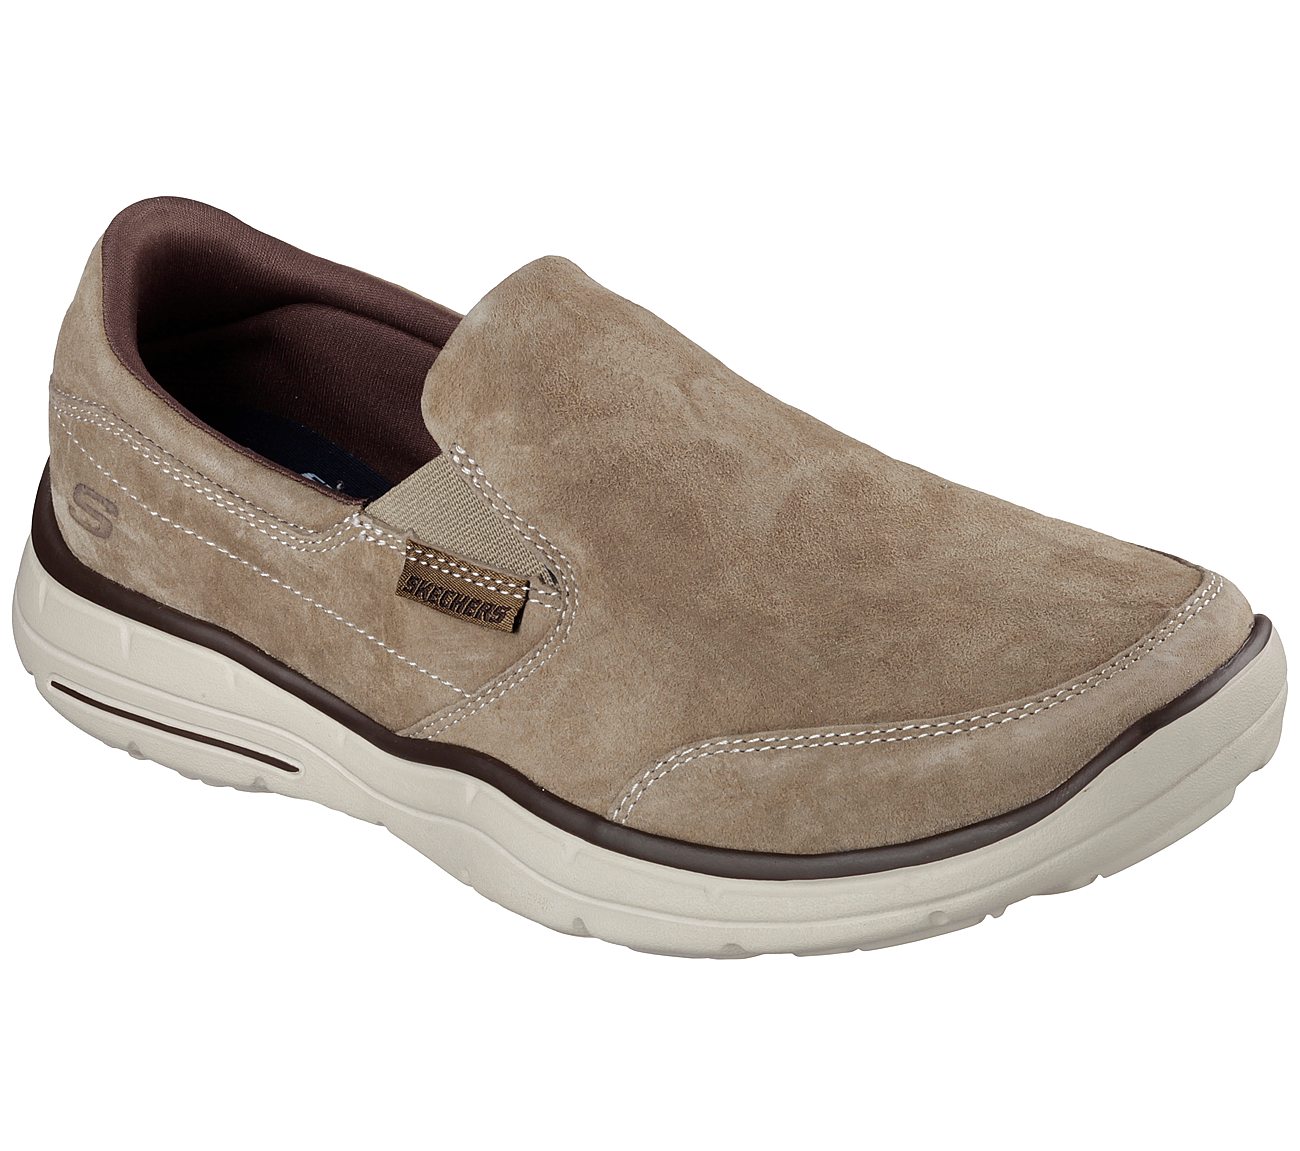 Buy SKECHERS Relaxed Fit: Glides - Molti USA Casuals Shoes